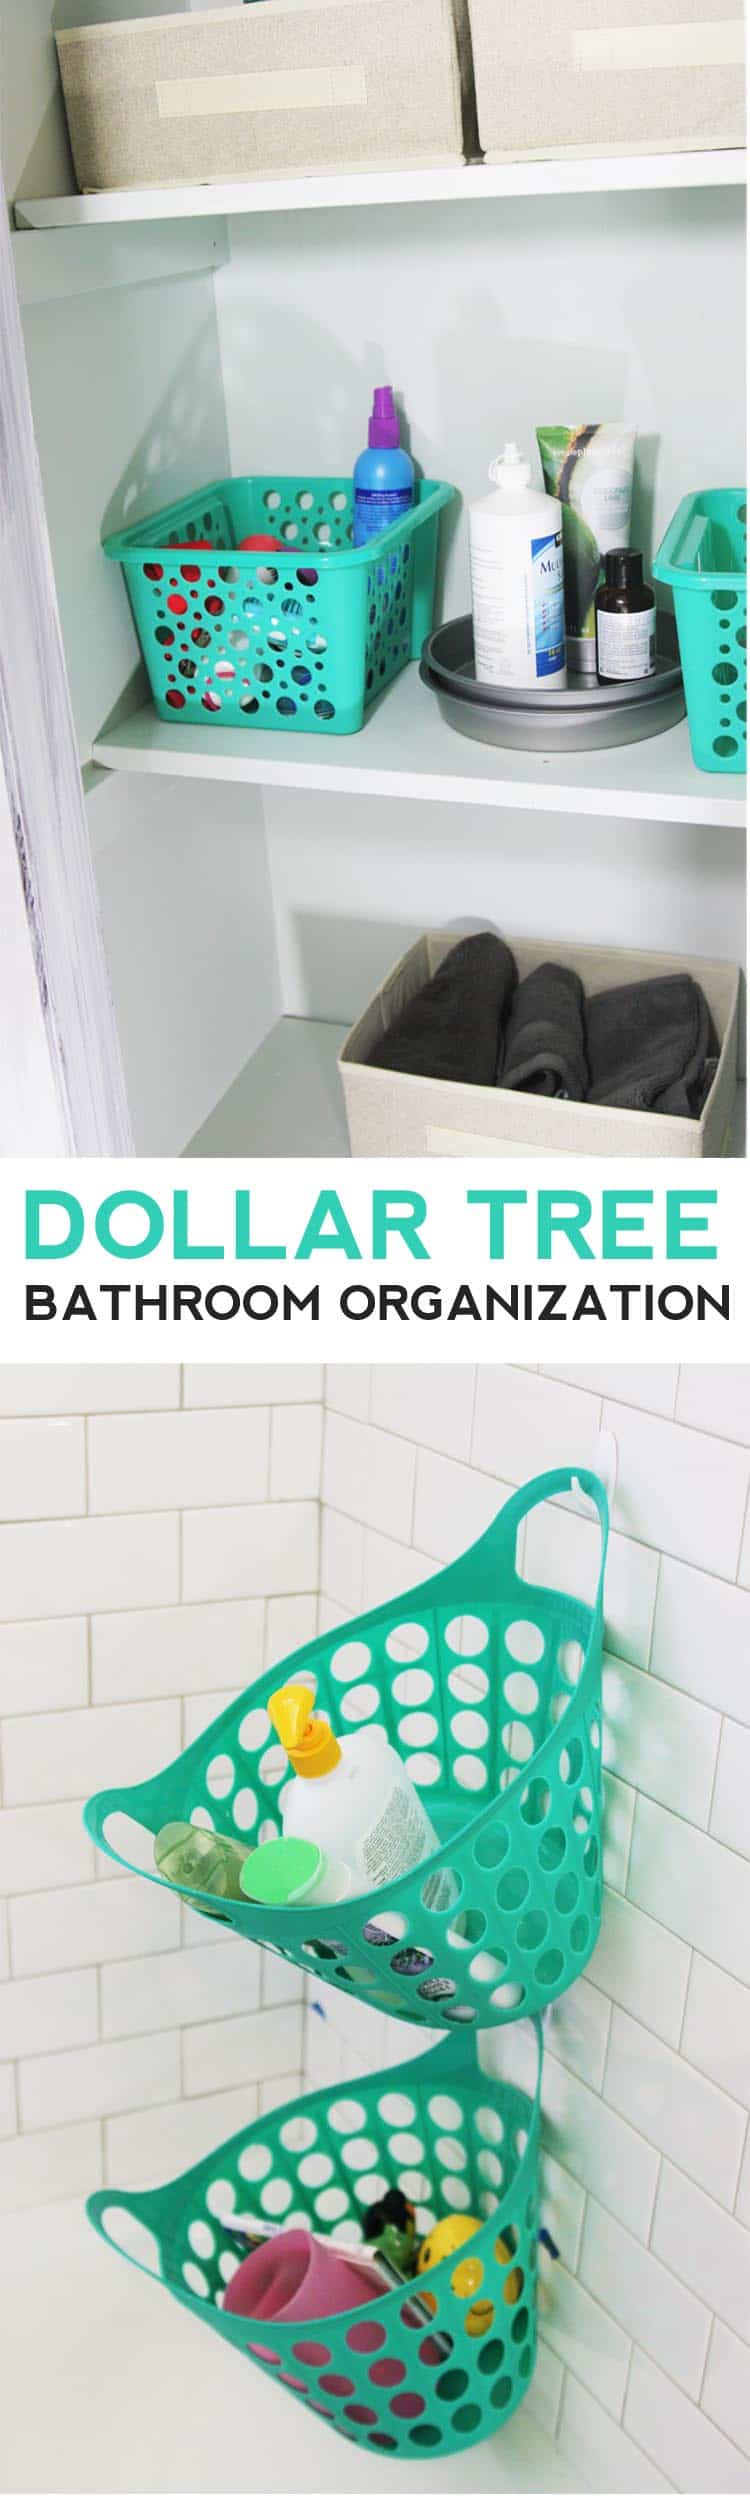 Completely organize your bathroom with stuff from Dollar Tree! This is the best post for bathroom organization tips on a budget!